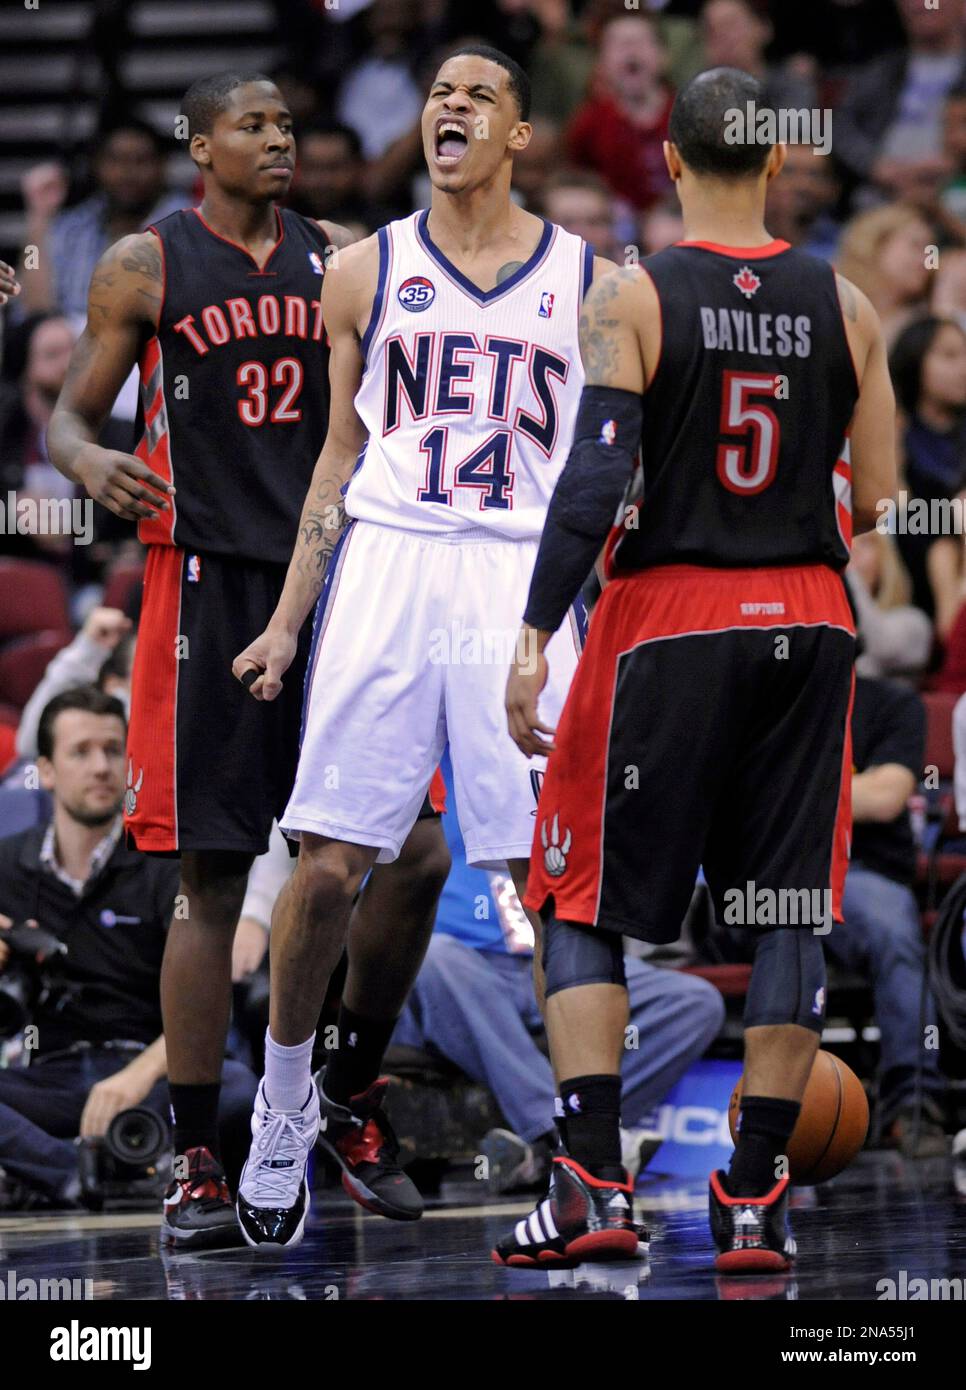 New Jersey Nets' Gerald Green (14) tries to block a shot by Miami Heat's  LeBron James (6) during the first half of a NBA basketball game in Miami,  Tuesday, March 6, 2012. (